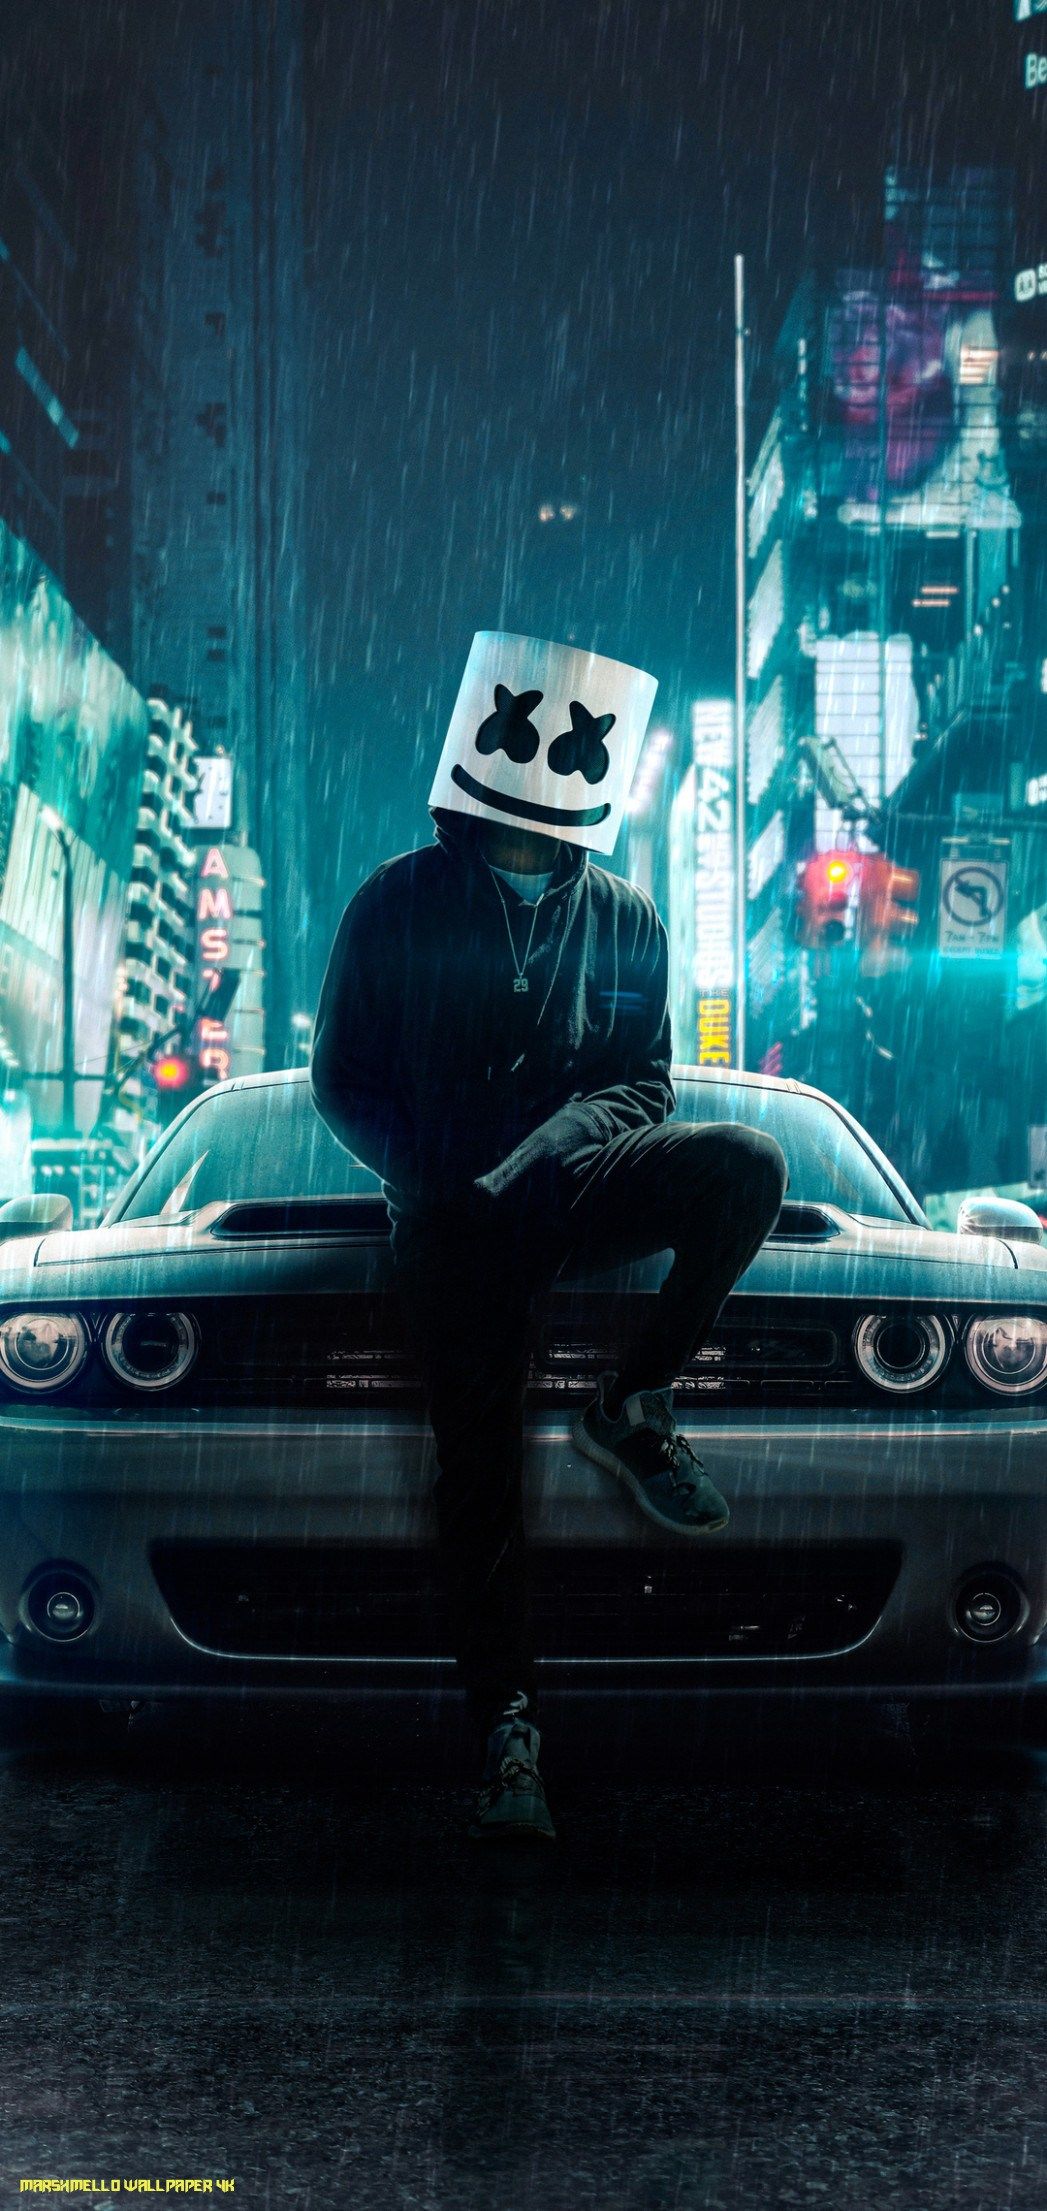 Why You Must Experience Marshmello Wallpaper 114k At Least Once